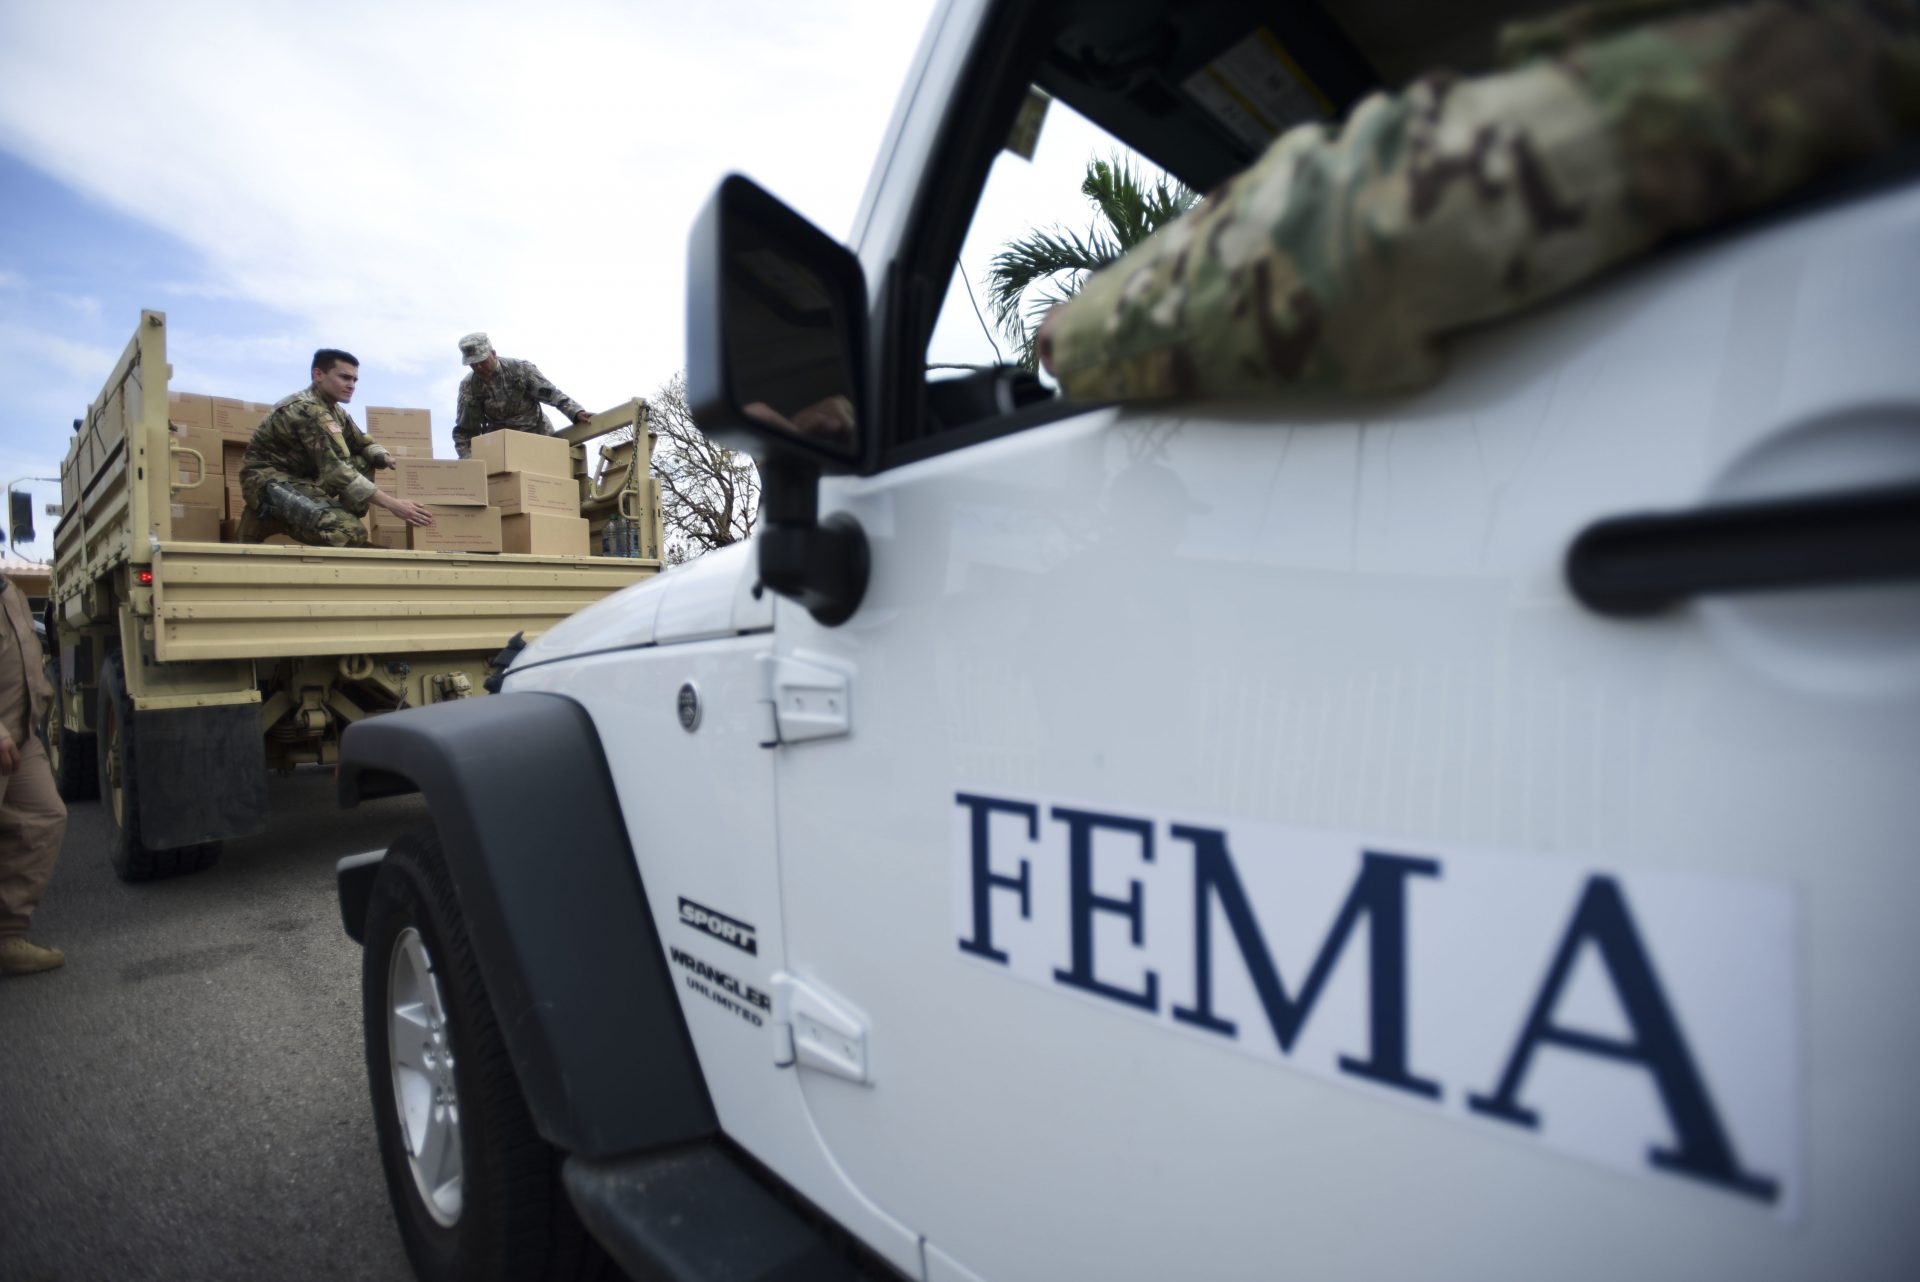 FILE PHOTO: In this Oct. 5, 2017 file photo, Department of Homeland Security personnel deliver supplies to Santa Ana community residents in the aftermath of Hurricane Maria in Guayama, Puerto Rico. Federal authorities said Tuesday, Sept. 10, 2019, that they have arrested two former officials of the Federal Emergency Management Authority and the former president of a major disaster relief contractor, accusing them of bribery and fraud in the efforts to restore electricity to Puerto Rico in the wake of Hurricane Maria.